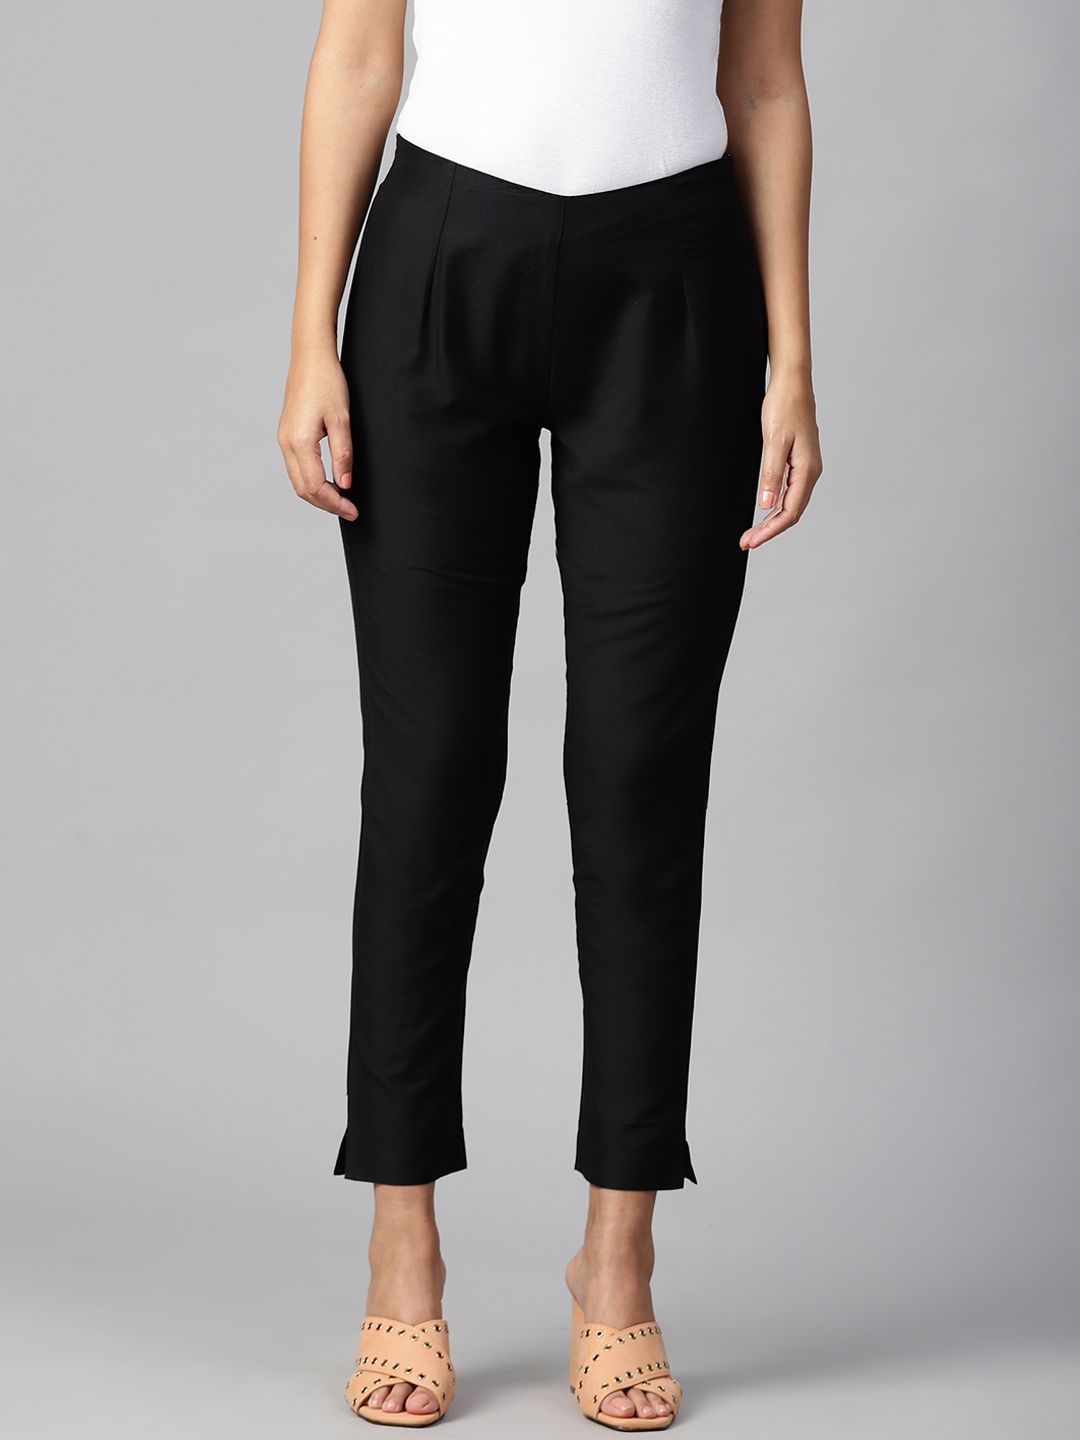 W Women Black Slim Fit Solid Regular Cropped Trousers Price in India